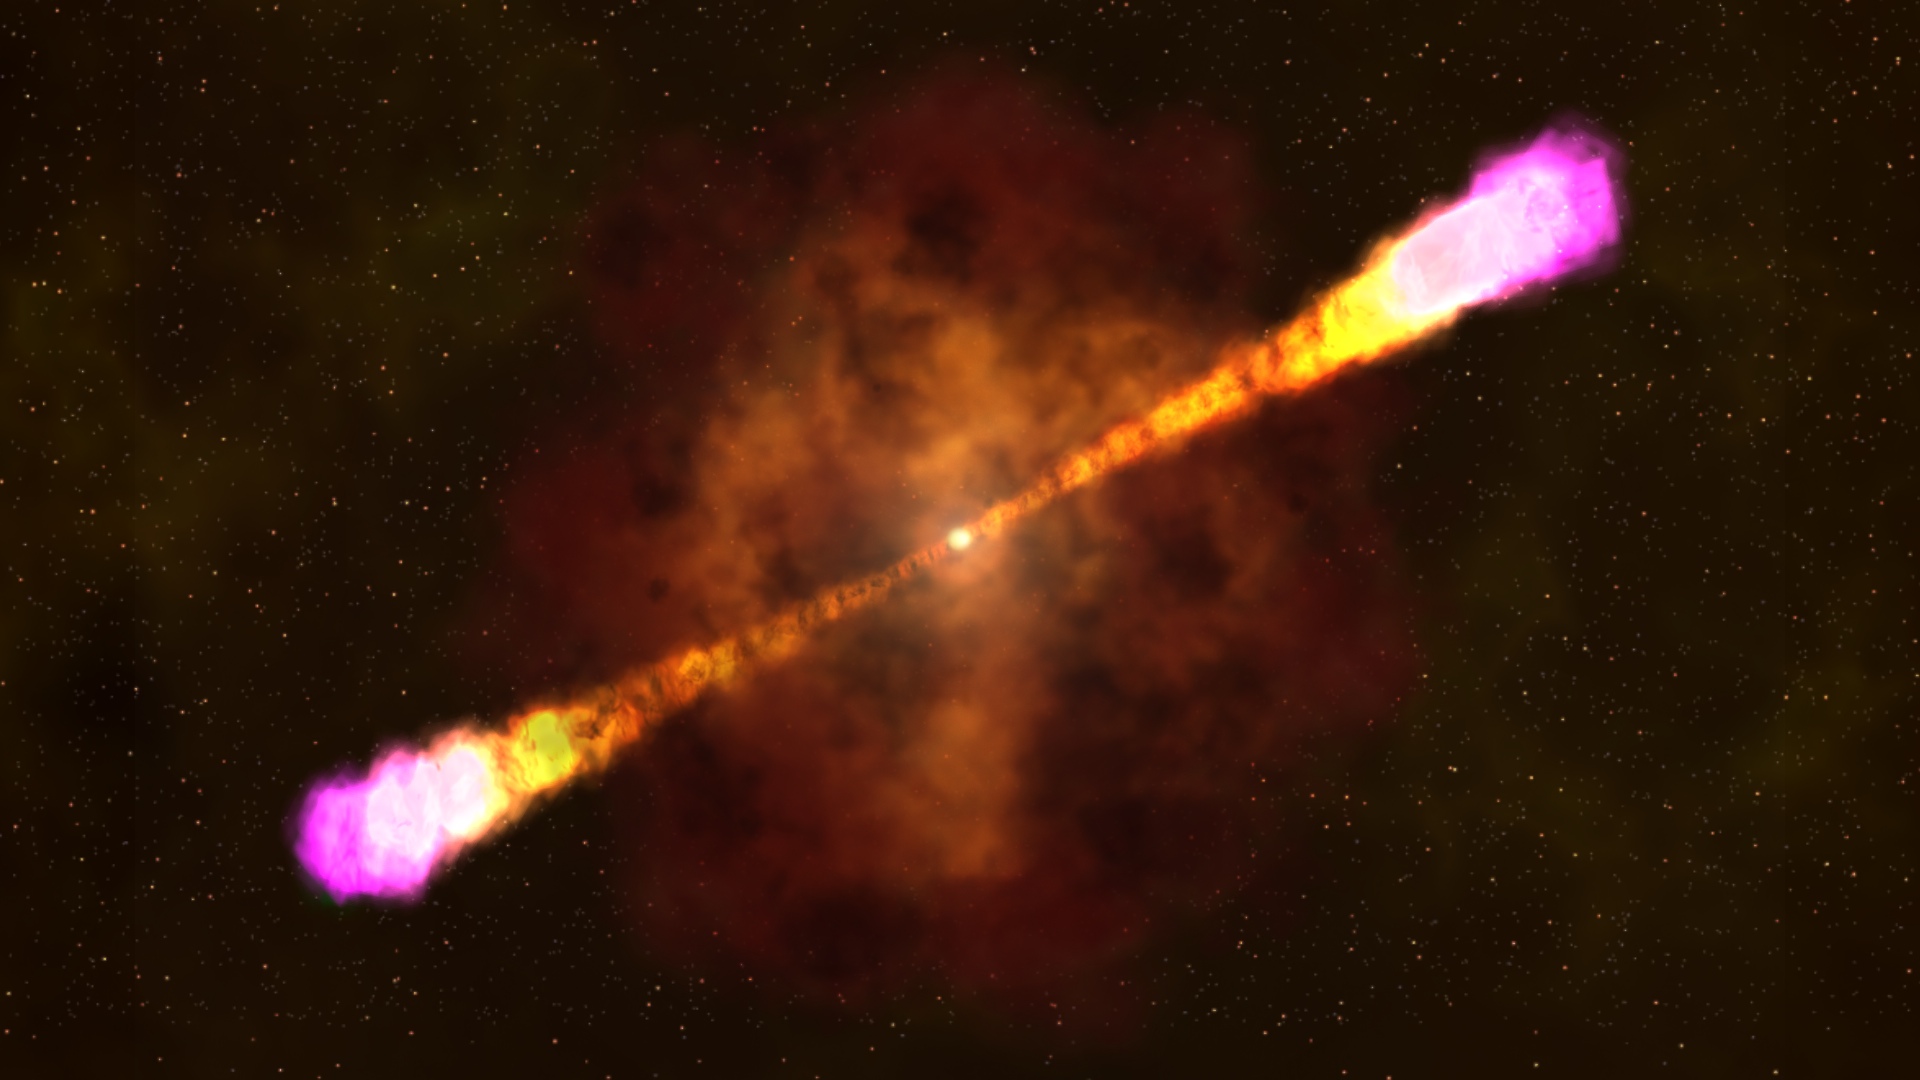 Gamma-ray bursts are the most luminous explosions in the cosmos. Astronomers think most occur when the core of a massive star runs out of nuclear fuel, collapses under its own weight, and forms a black hole. The black hole then drives jets of particles that drill all the way through the collapsing star at nearly the speed of light. Artist's rendering.Credit: NASA's Goddard Space Flight Center 